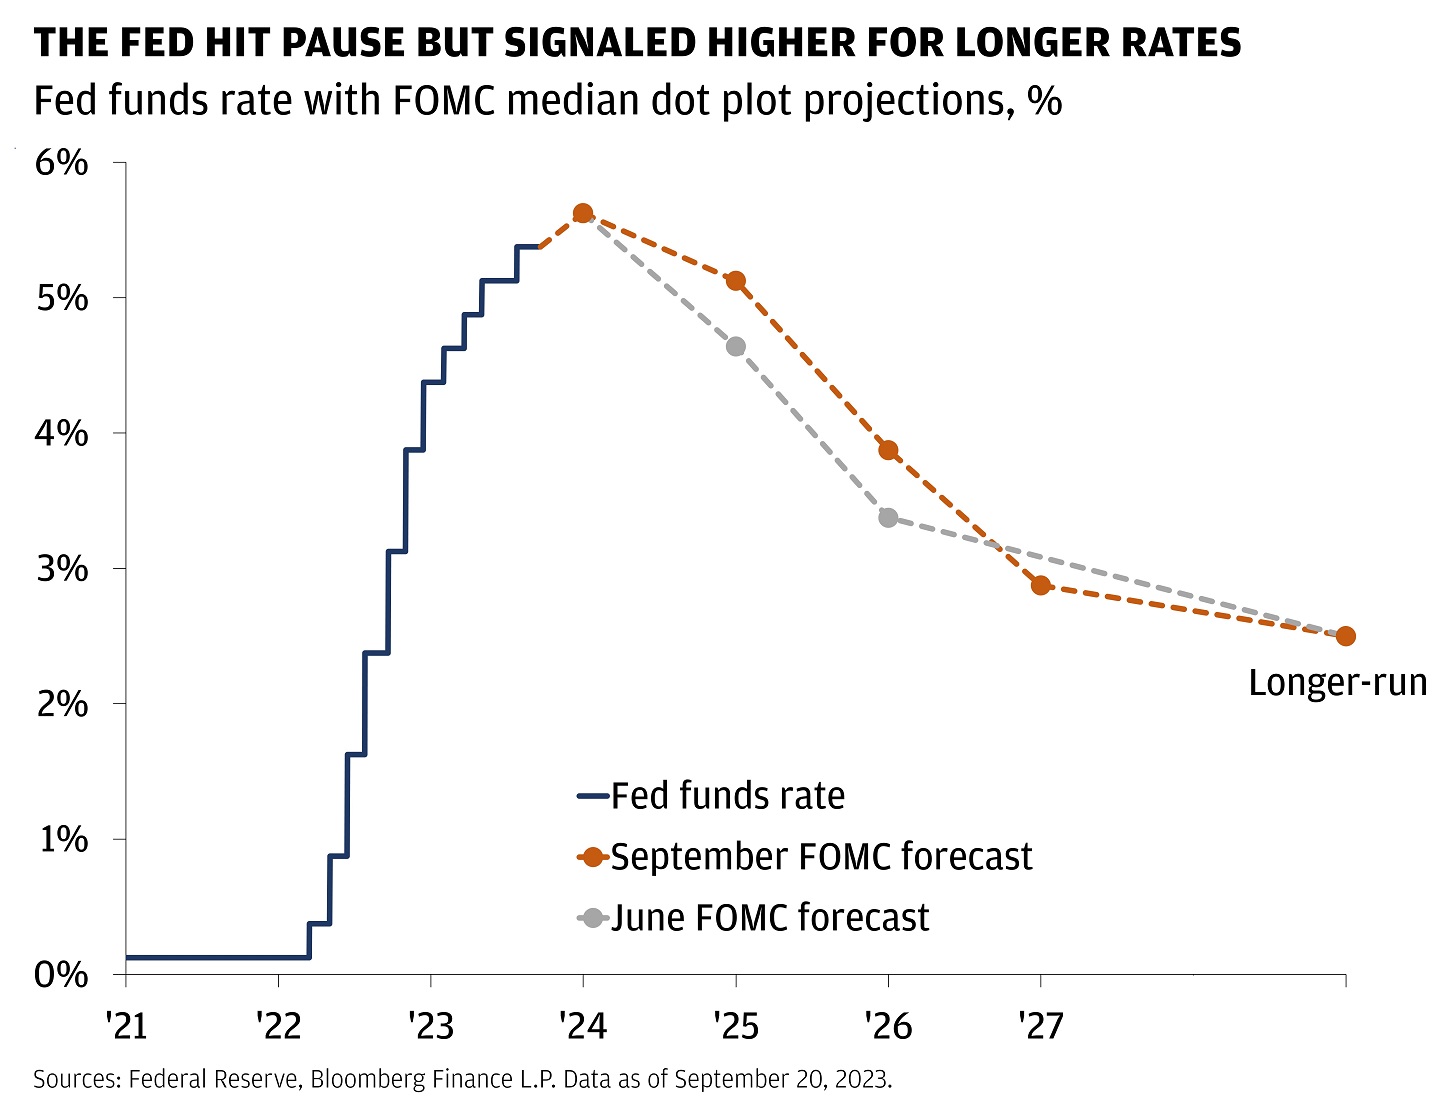 This chart shows the Fed funds rate with the FOMC median dot plot projections for June and September.